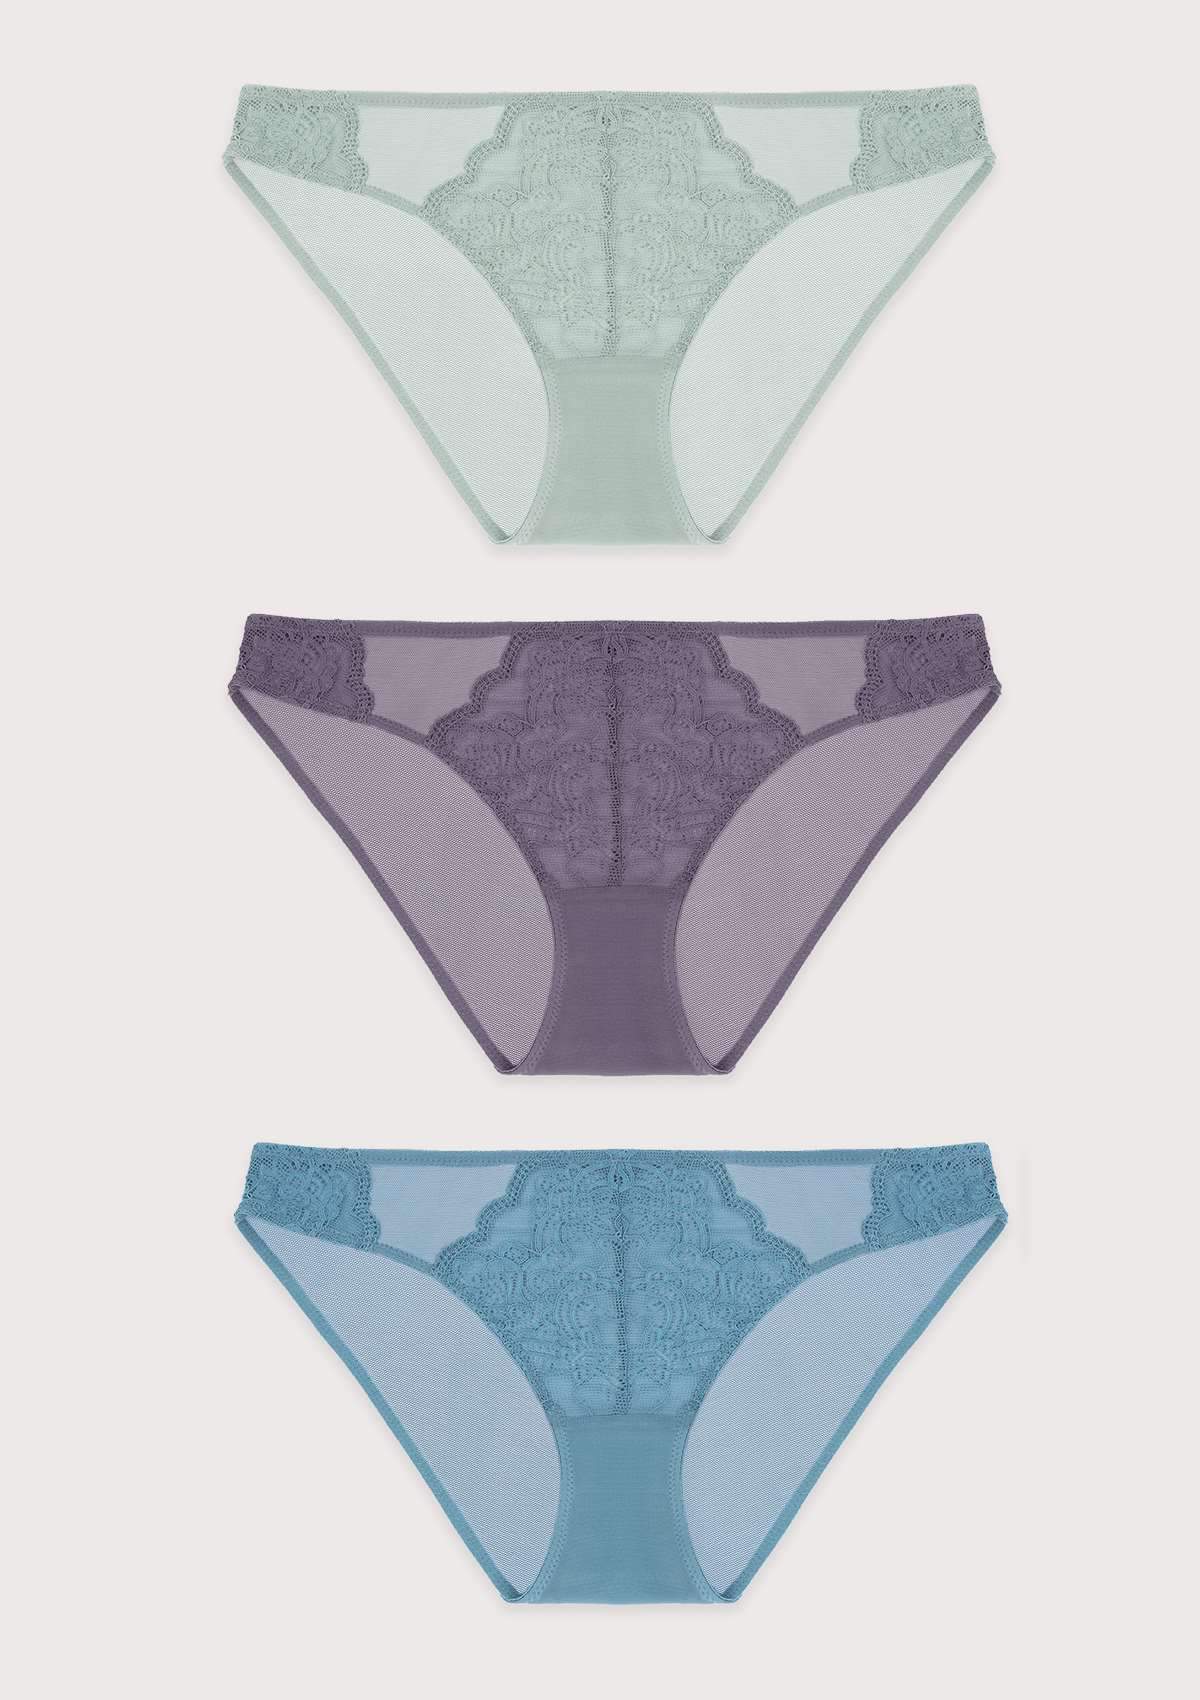 HSIA Floral Lace Front And Sheer Mesh Back Airy Bikini Panties -3 Pack - M / Green+Purple+Blue